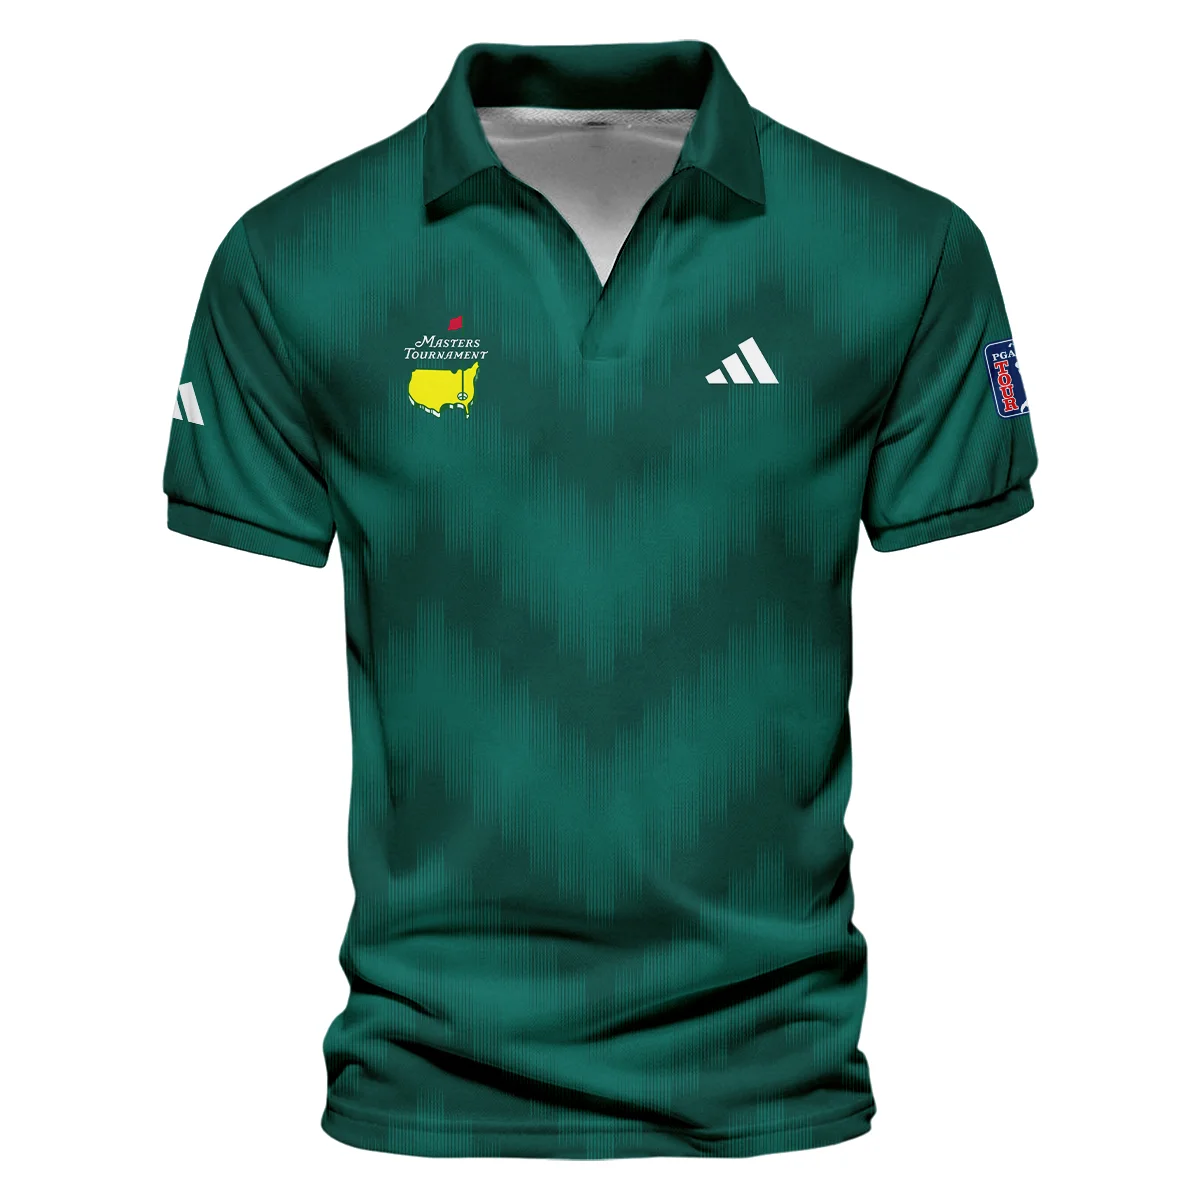 Golf Sport Green Gradient Stripes Pattern Adidas Masters Tournament Style Classic, Short Sleeve Polo Shirts Quarter-Zip Casual Slim Fit Mock Neck Basic